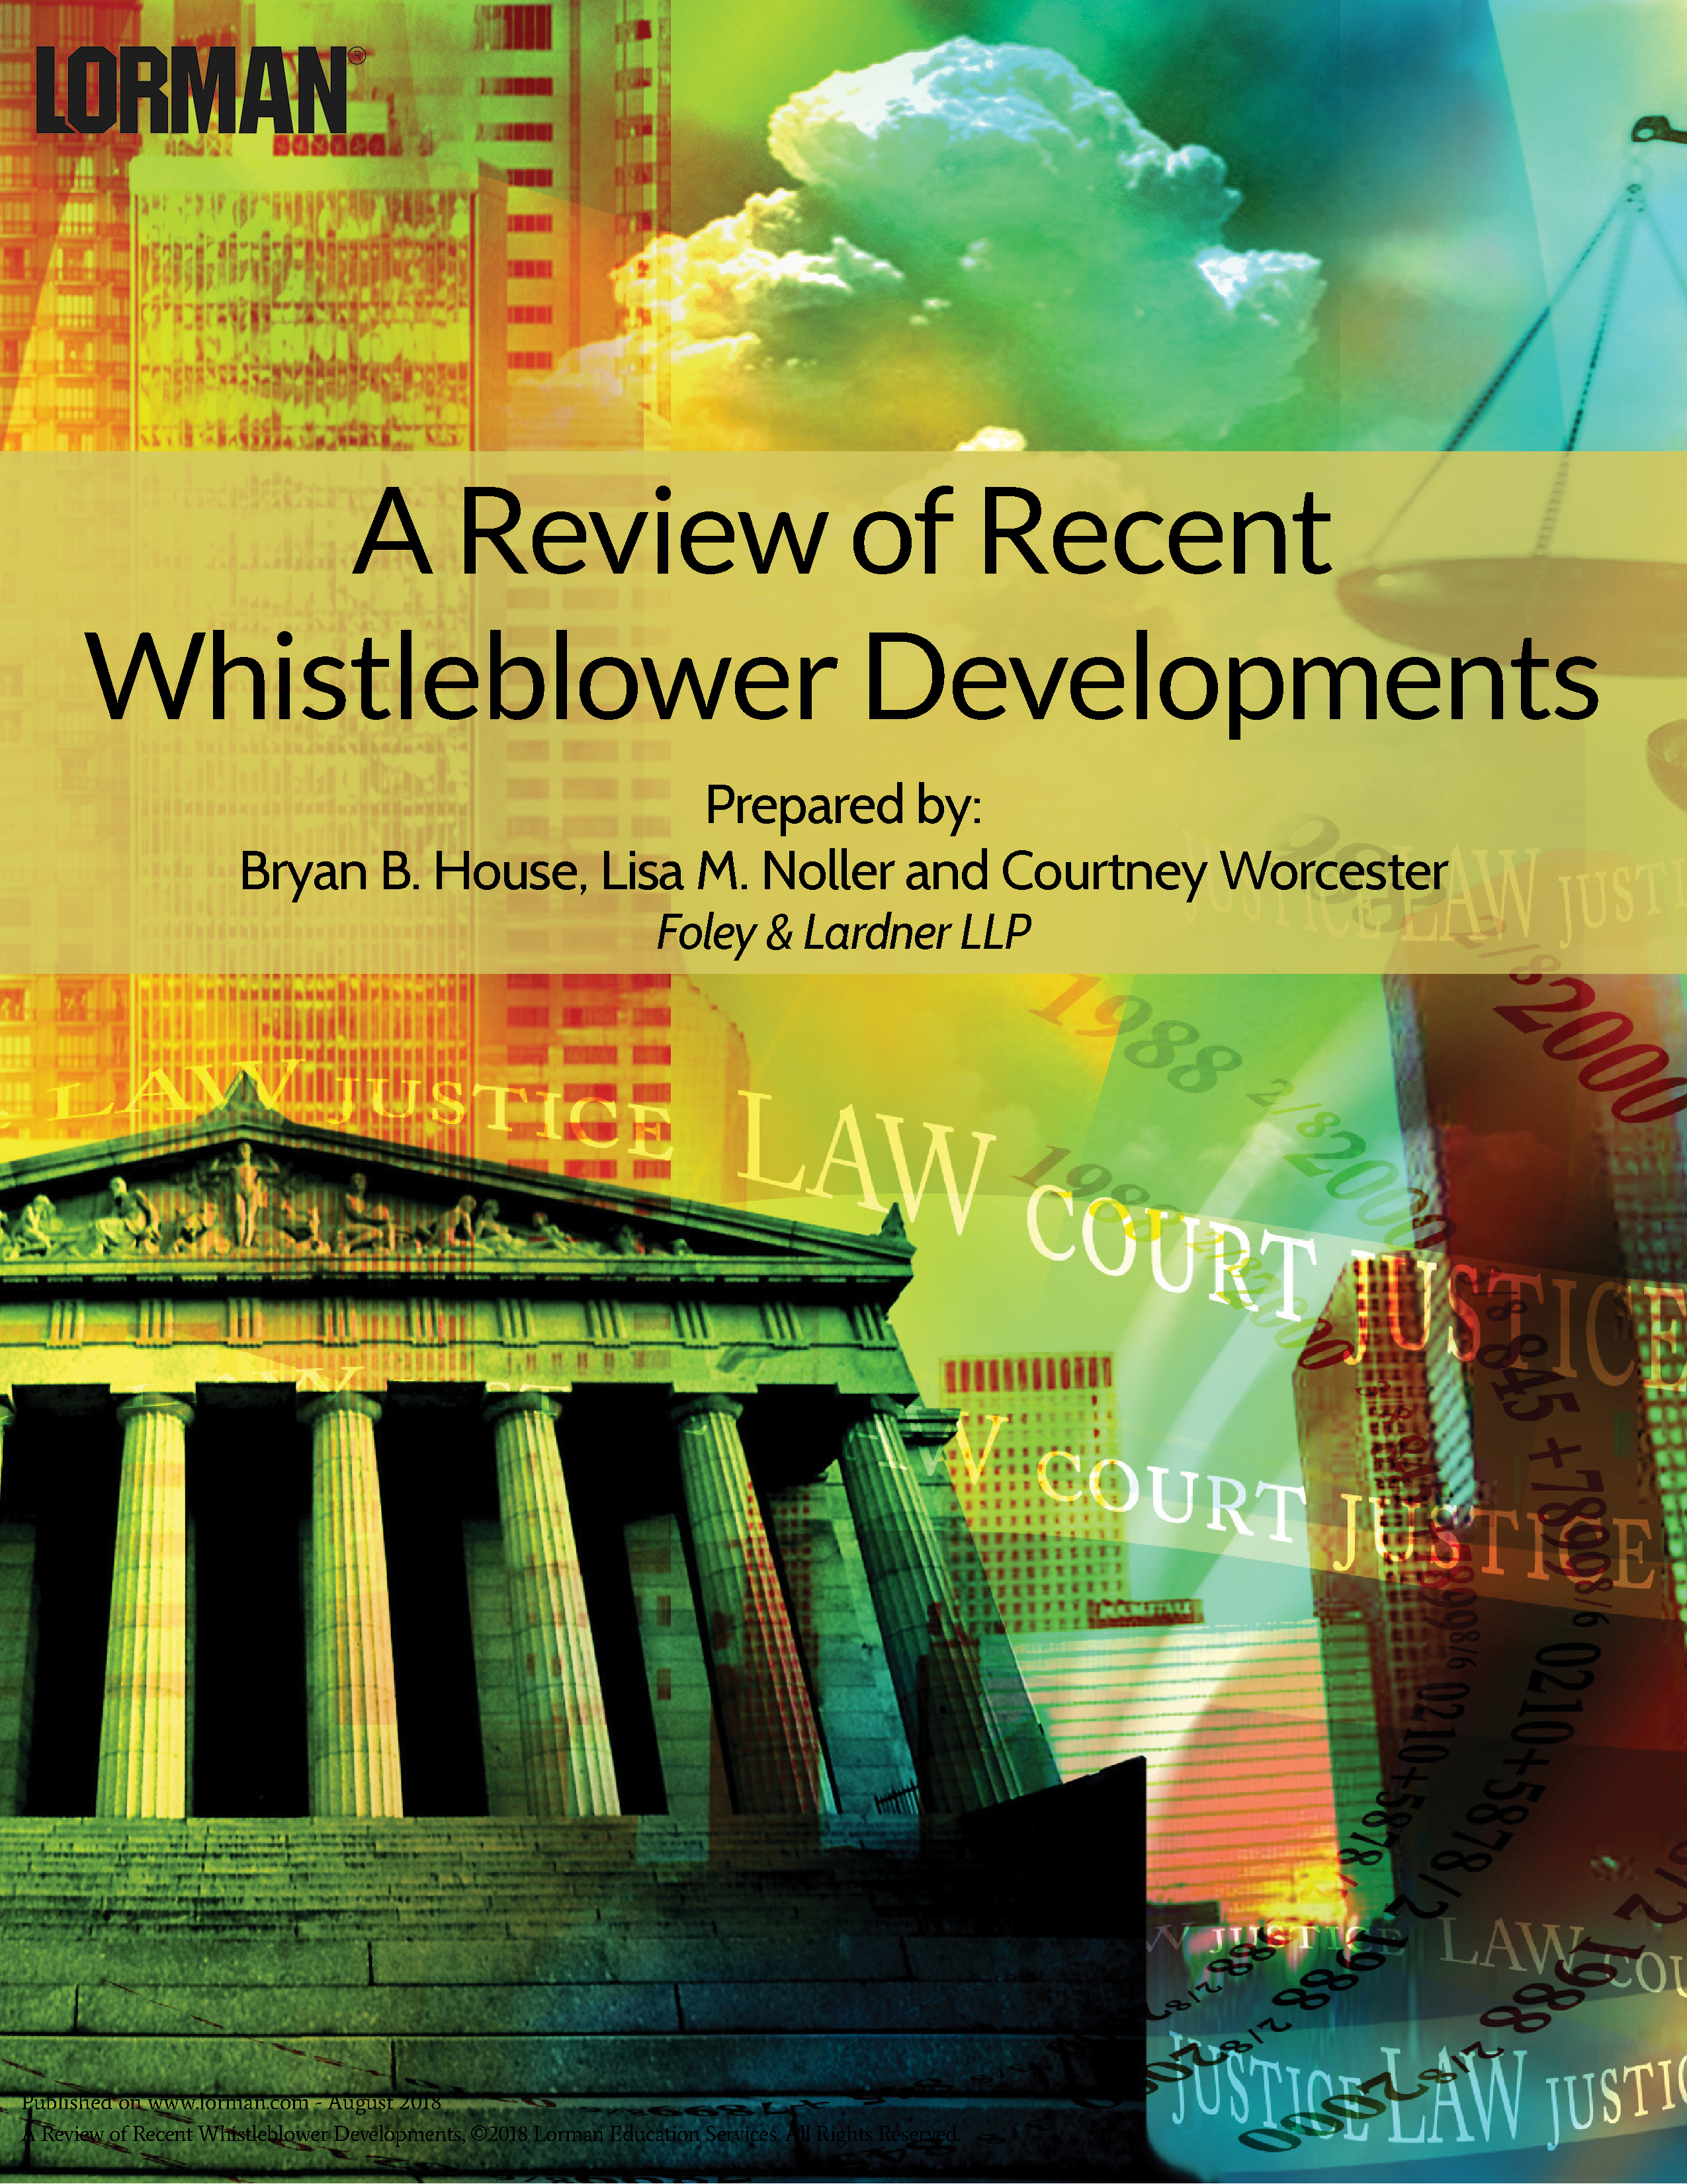 A Review of Recent Whistleblower Developments